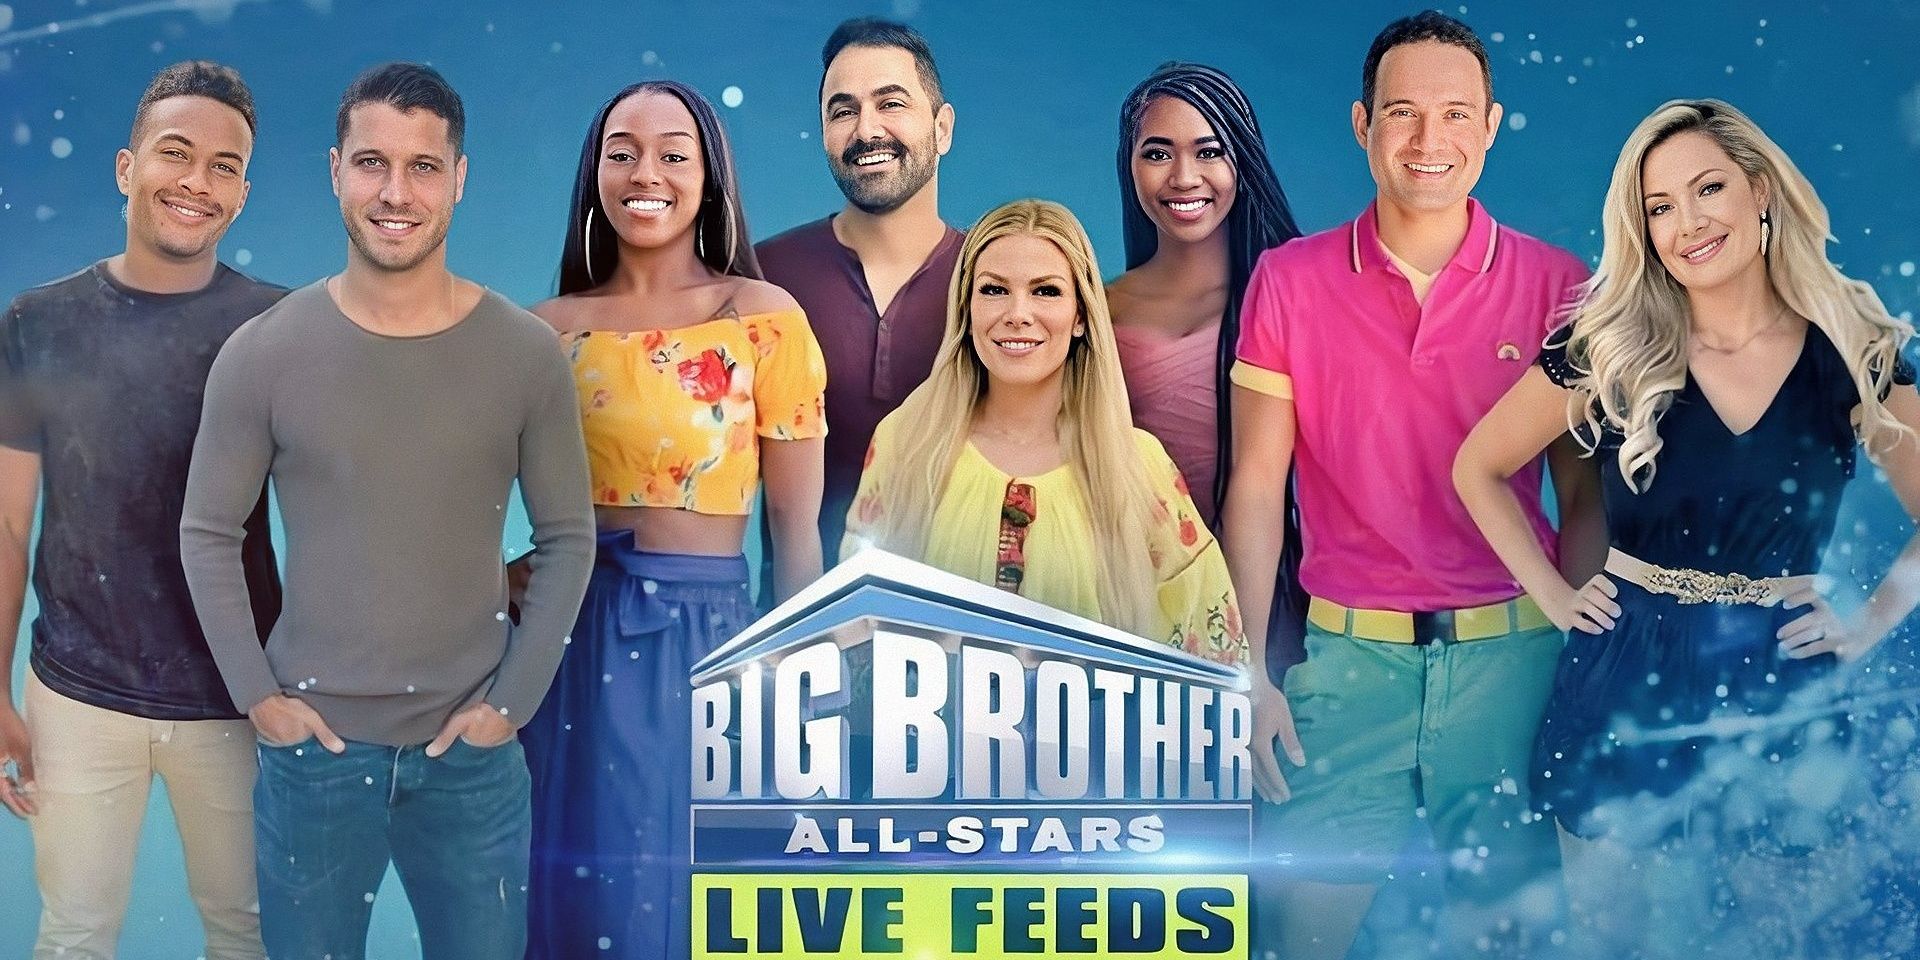 Big Brother 22 TV Schedule: What Time Does It Air On CBS & What Days?